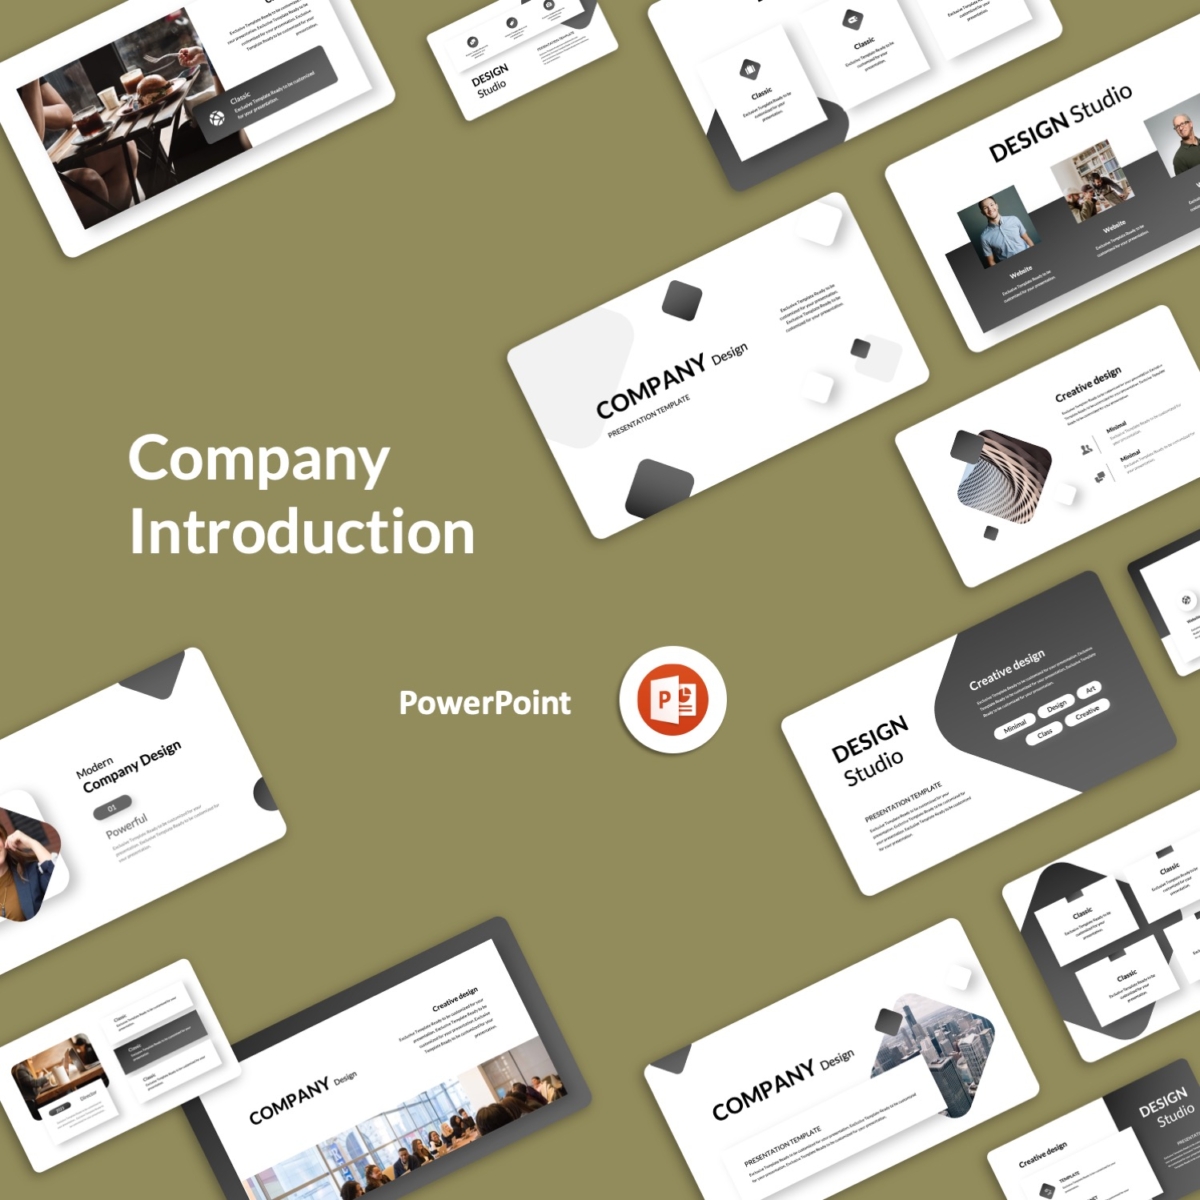 Company Introduction Business Design Presentation Template